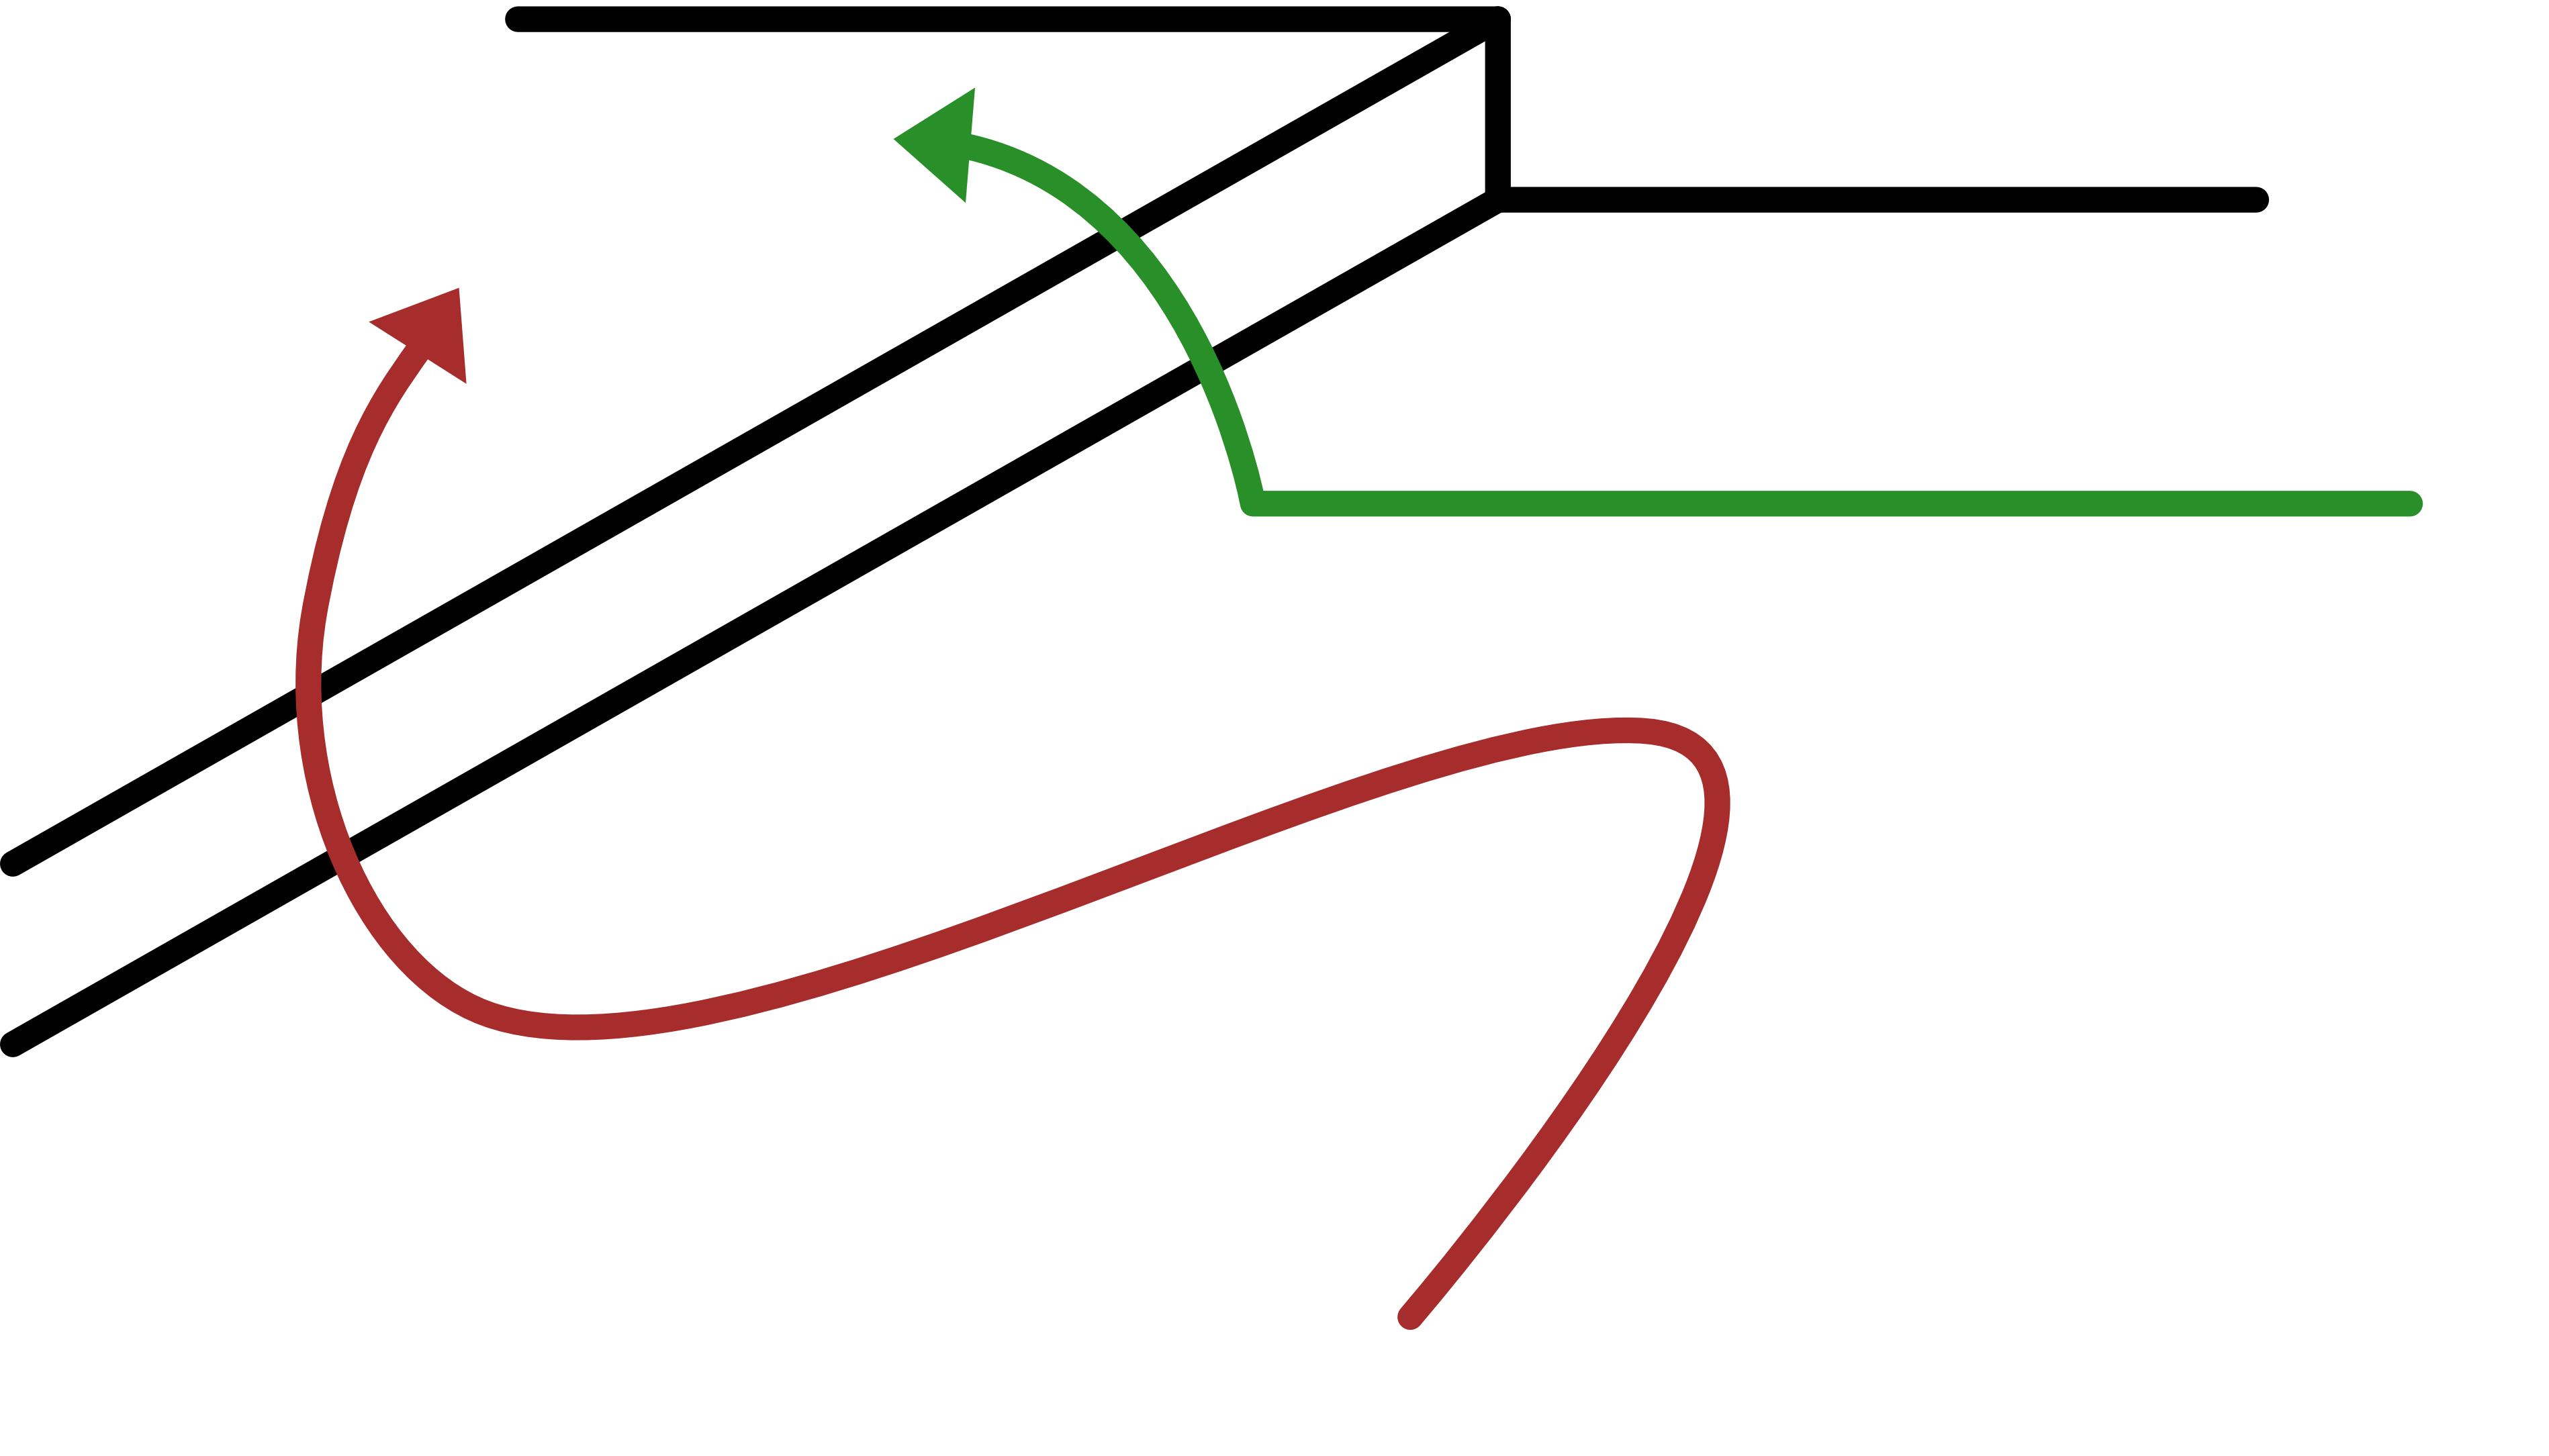 Thresholds may only be crossed at a 90° angle Drive modeDriving over thresholds